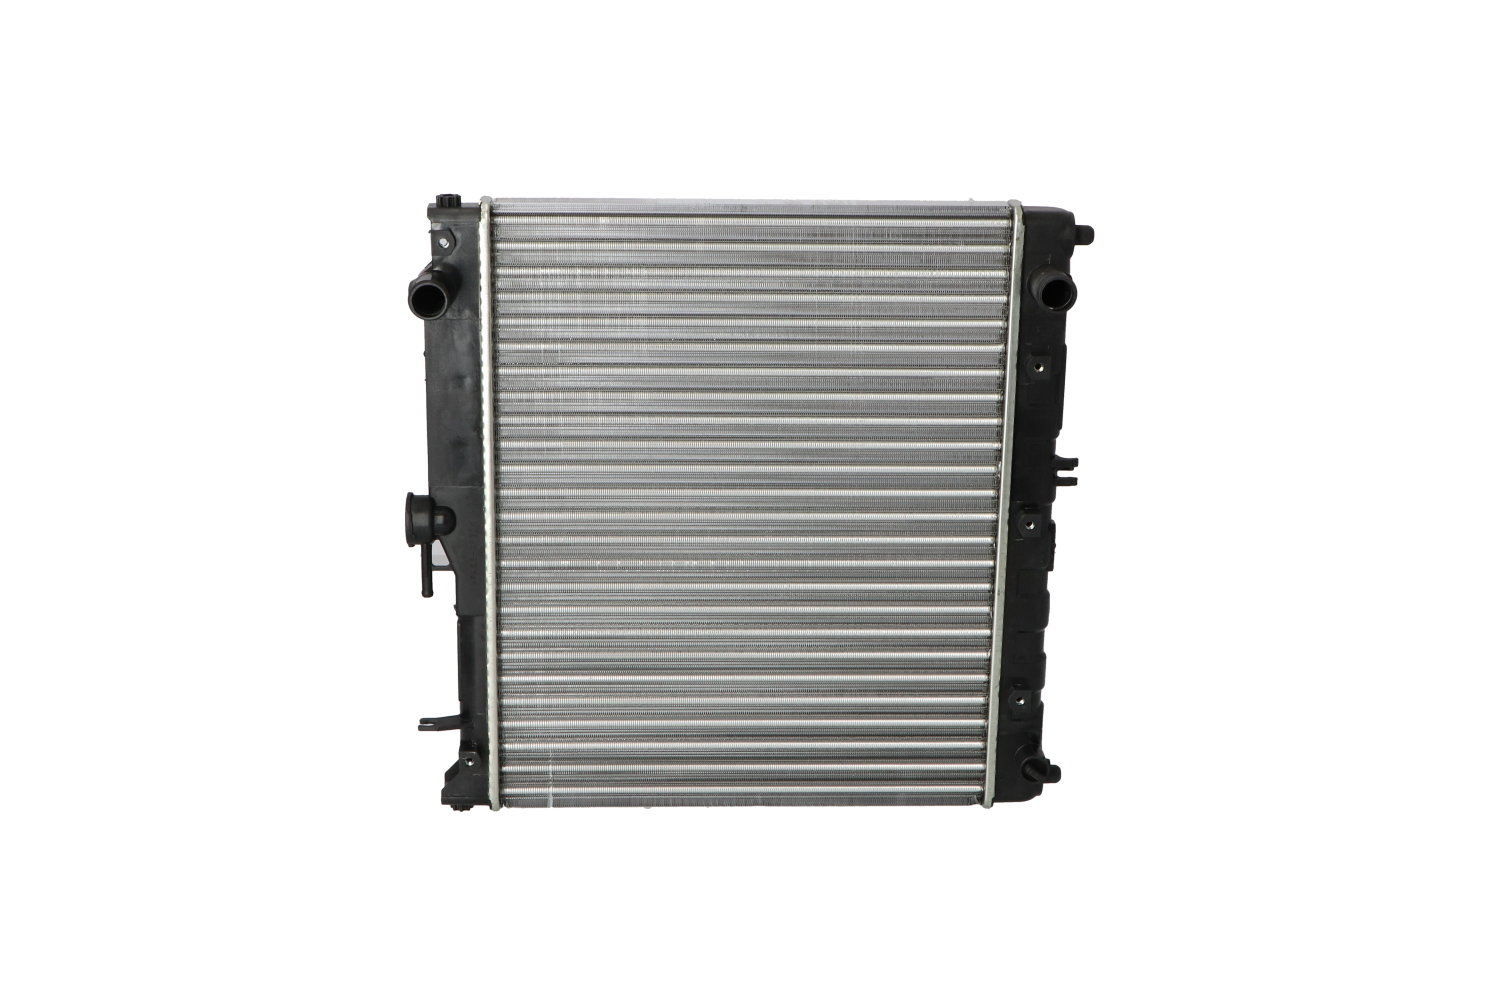 NRF Aluminium, 448 x 375 x 25 mm, Mechanically jointed cooling fins Radiator 53930A buy